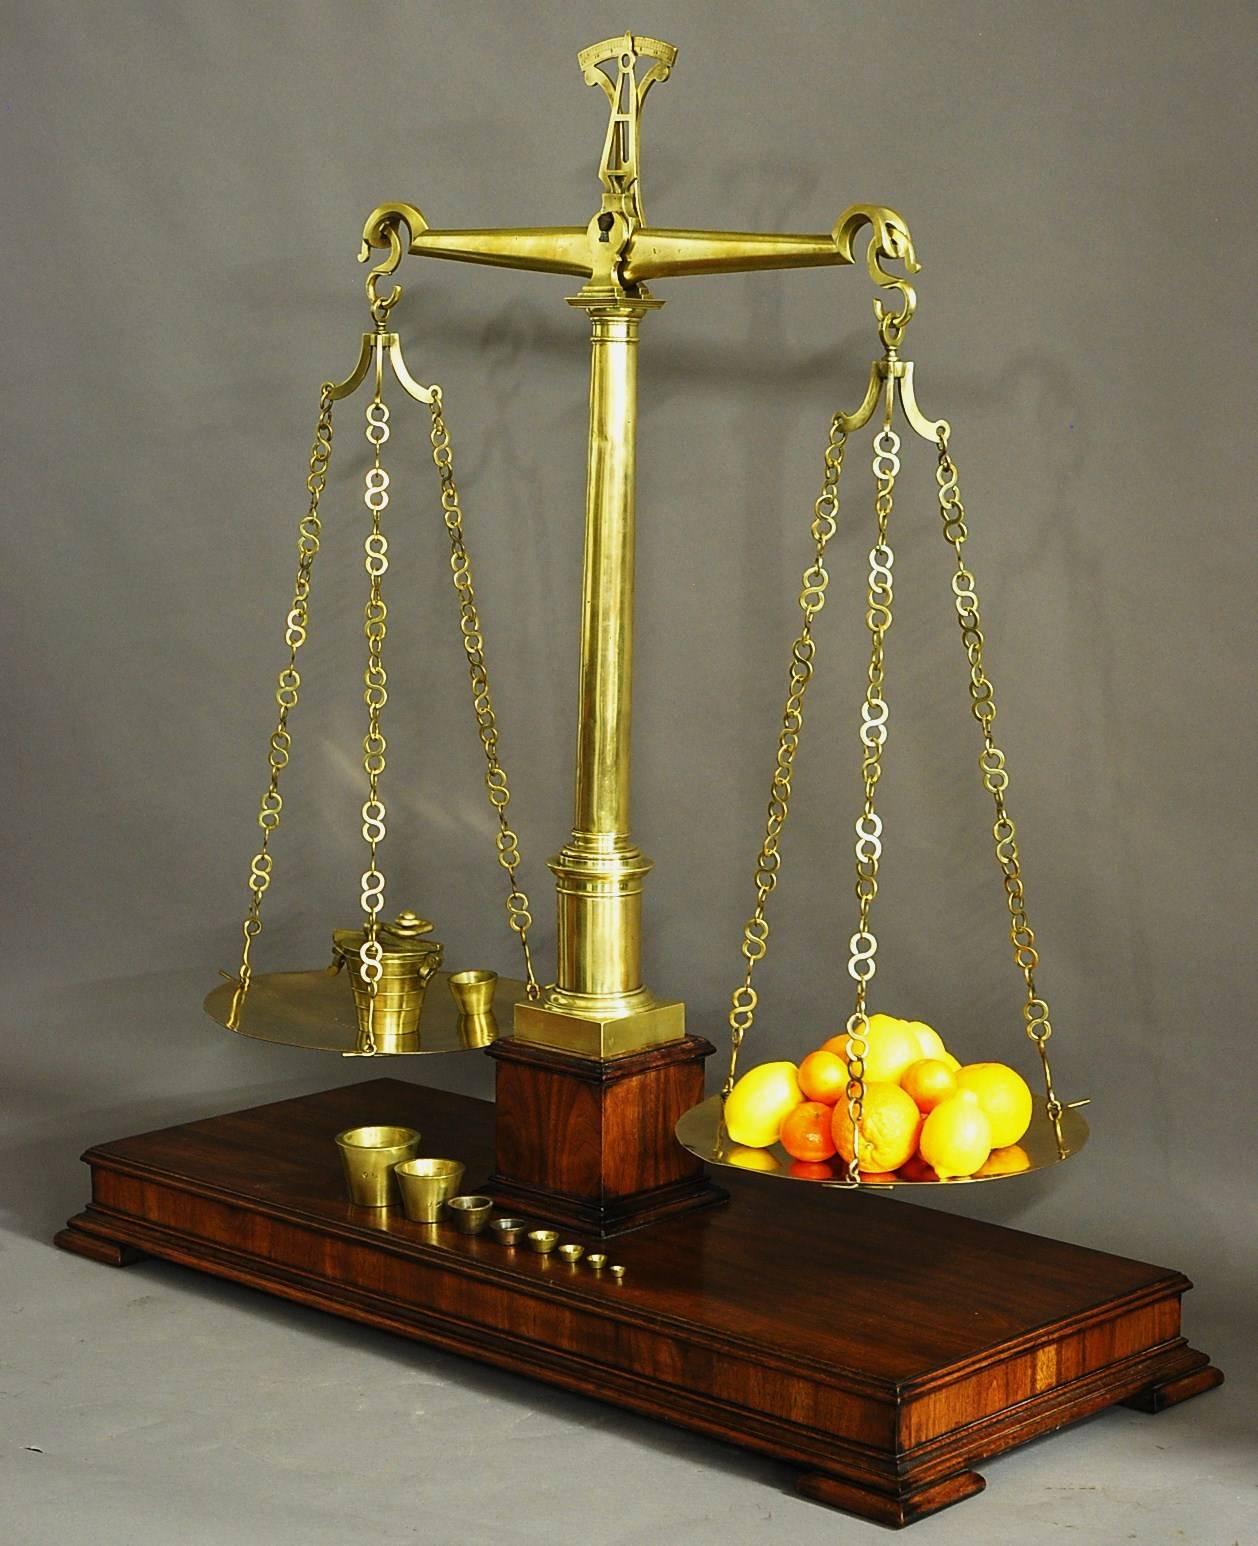 A large and highly decorative pair of 19th century brass apothecary balance scales with 19th century brass apothecary weights, possibly French.

The scales have an arrow to the top which points to the appropriate weight with horizontal beam and a